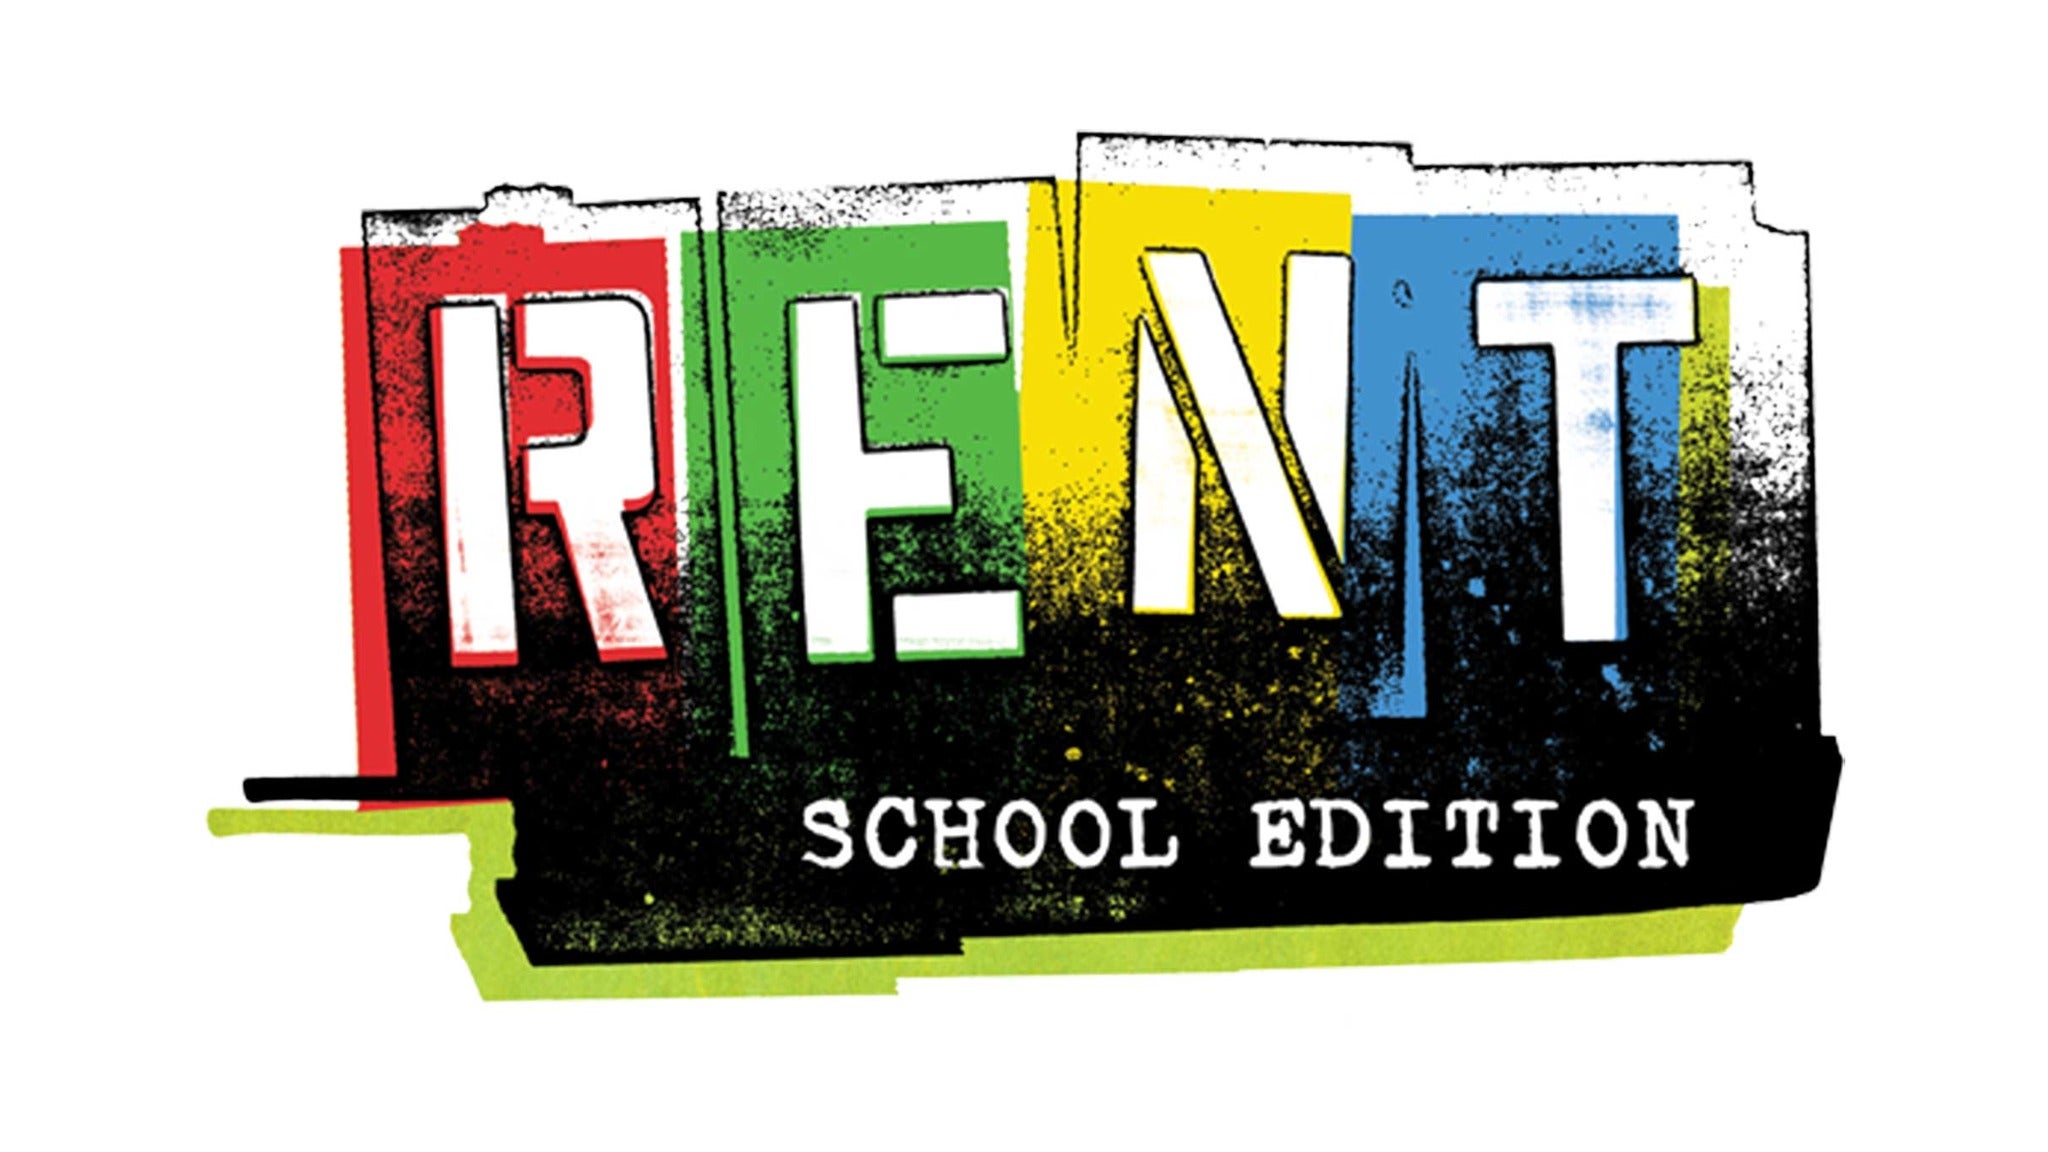 Rent (Touring) in Buffalo promo photo for Exclusive presale offer code